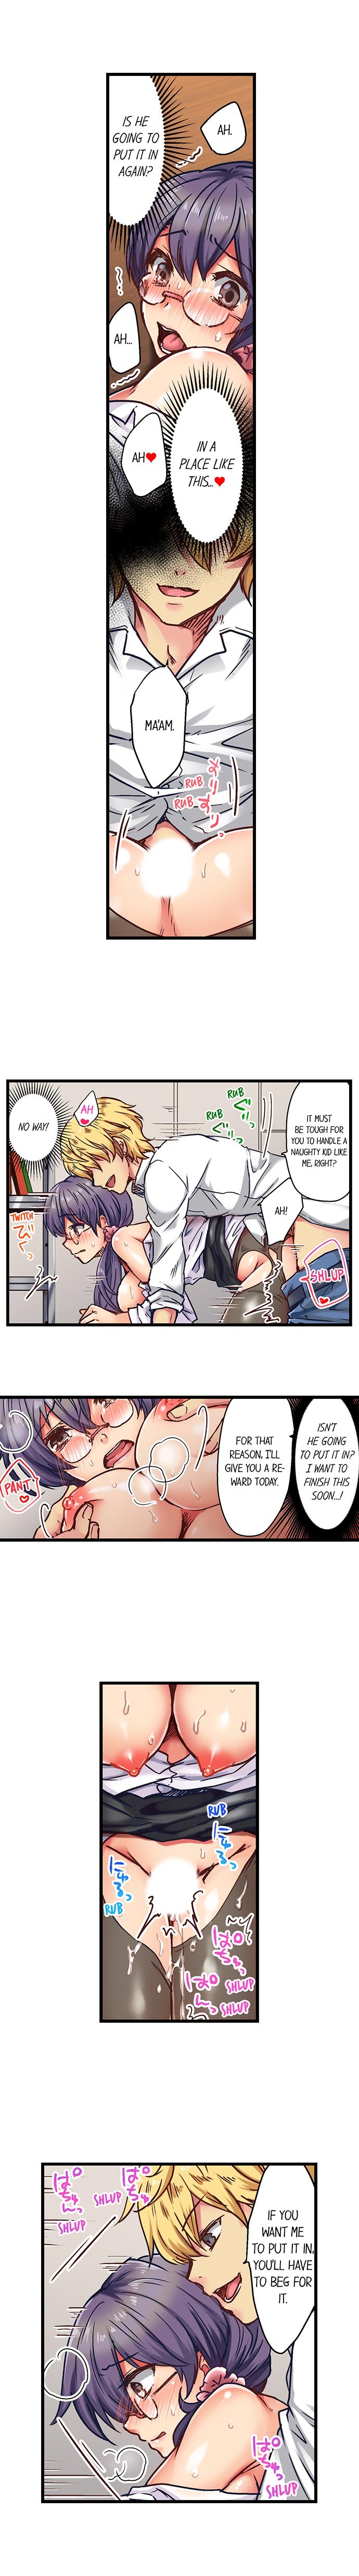 Rewarding My Student With Sex - Chapter 5 Page 6